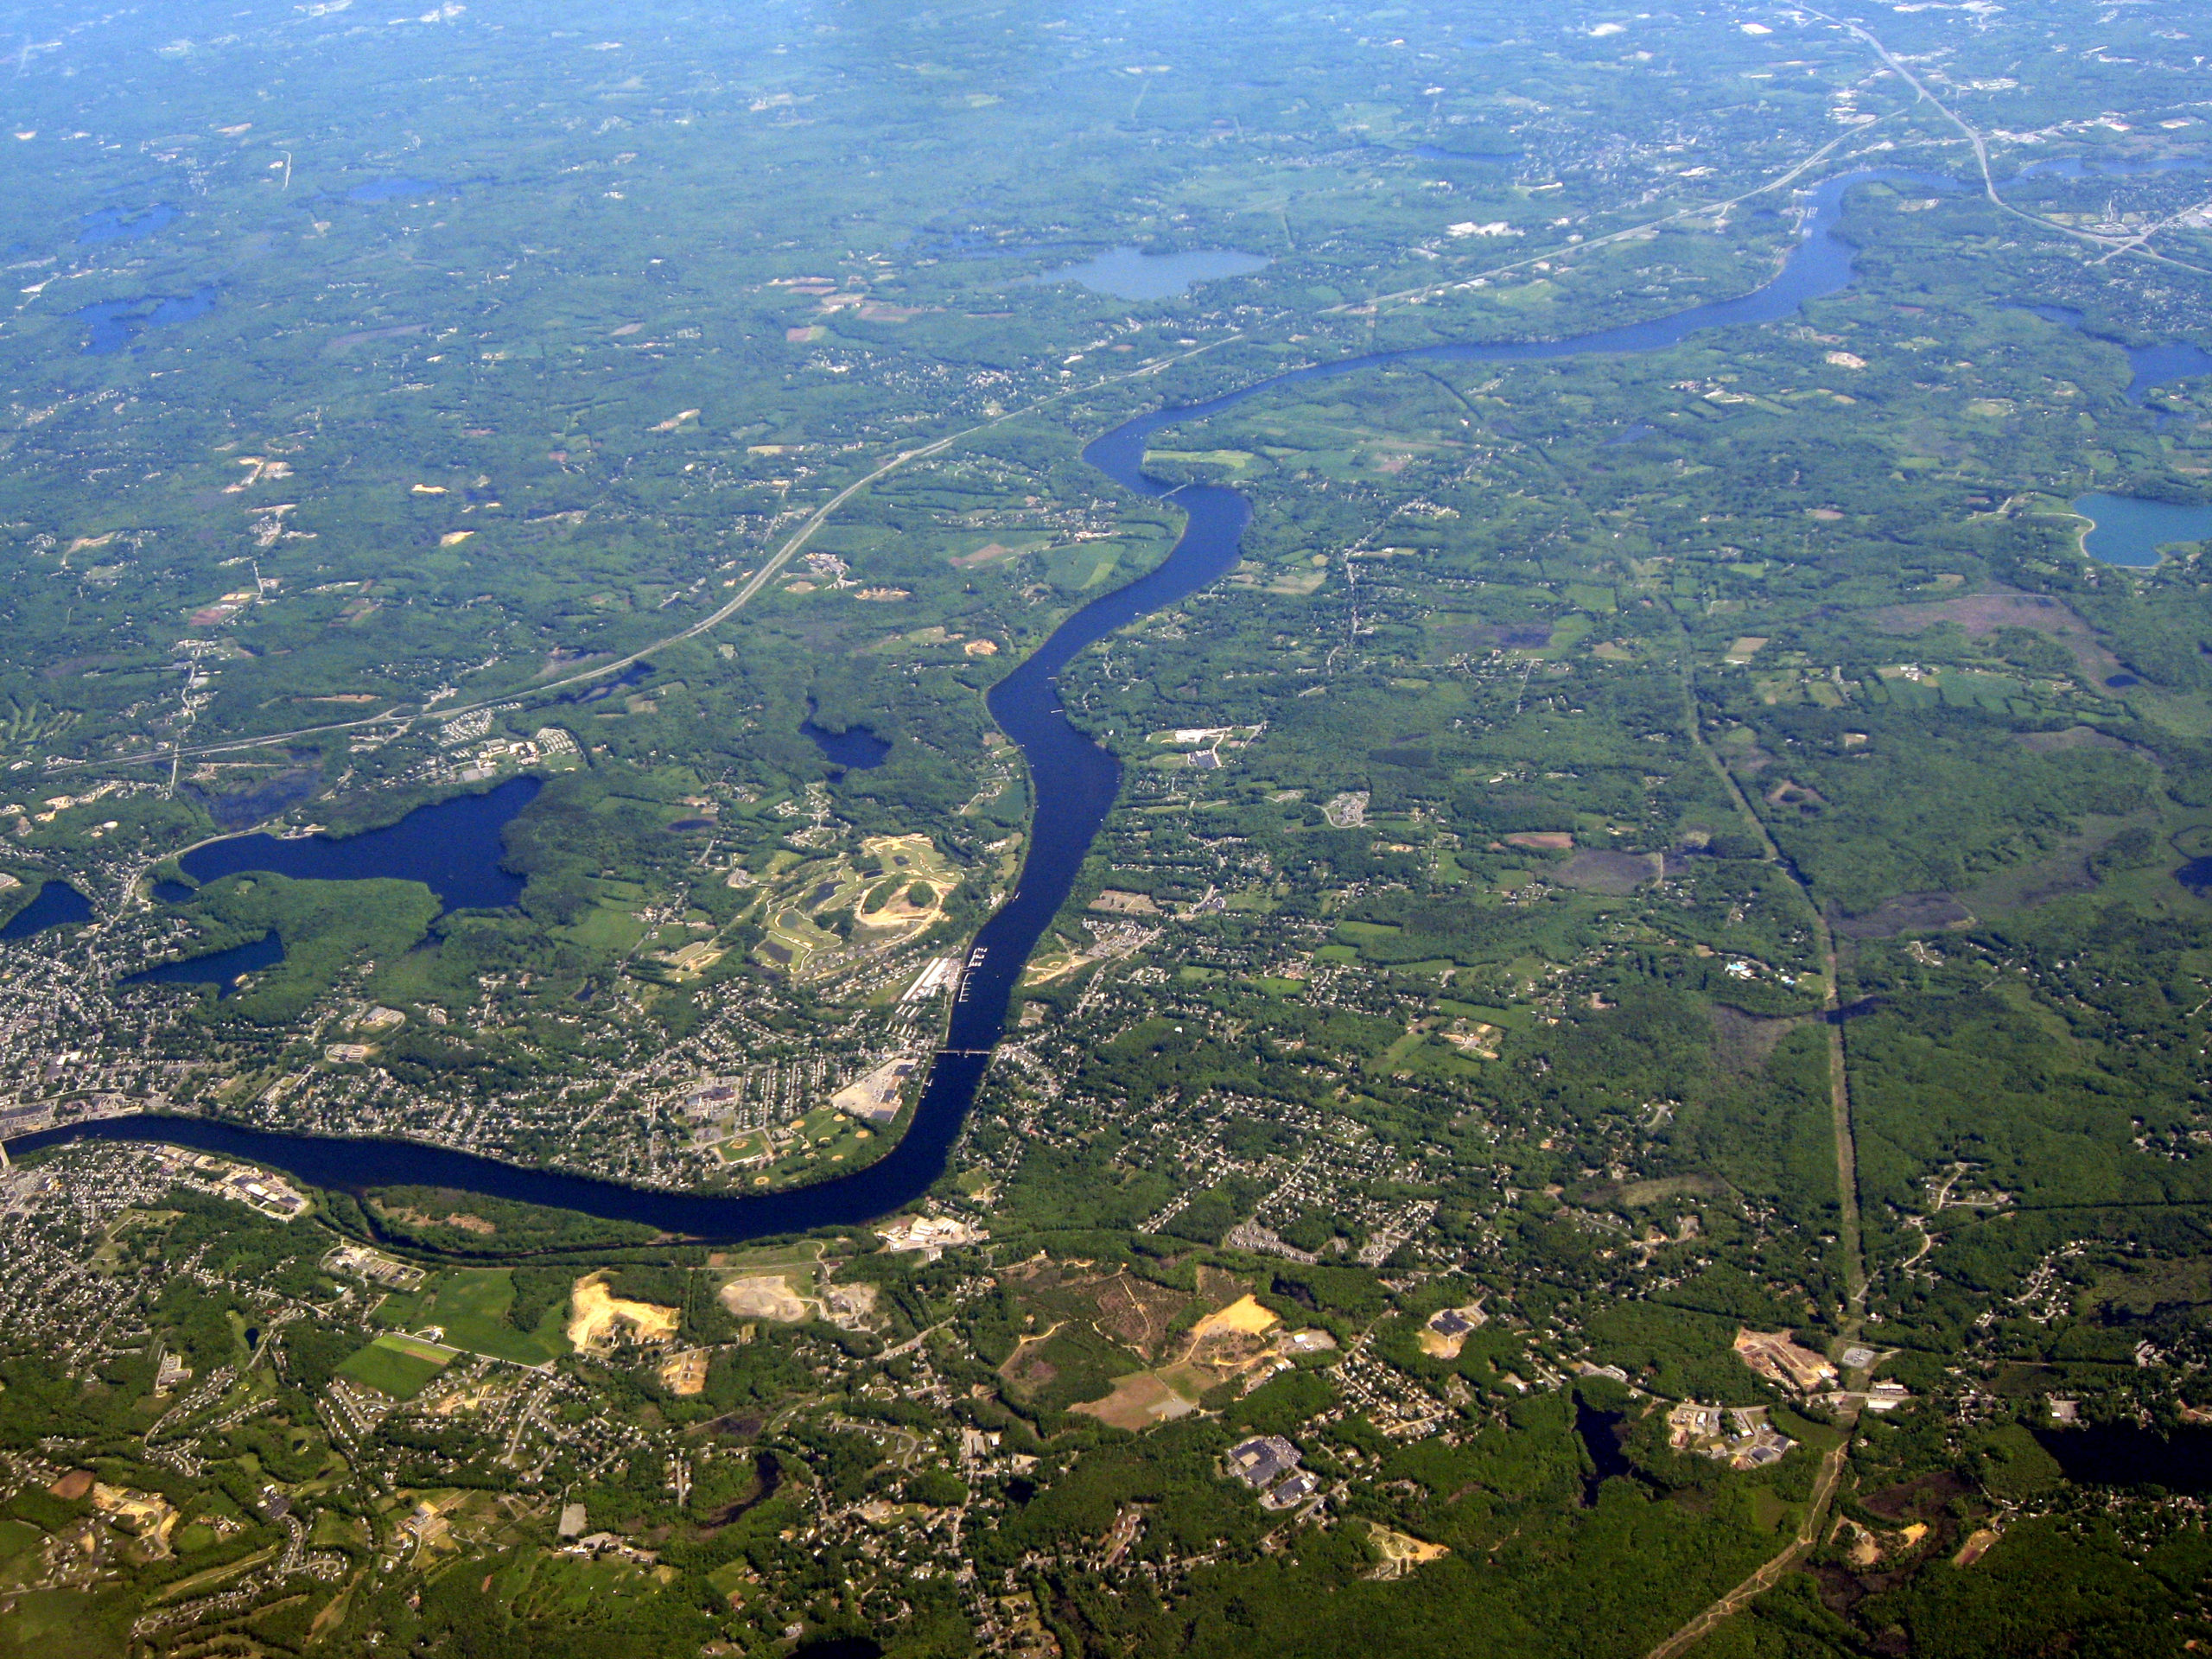 Earth Day and the Merrimack River